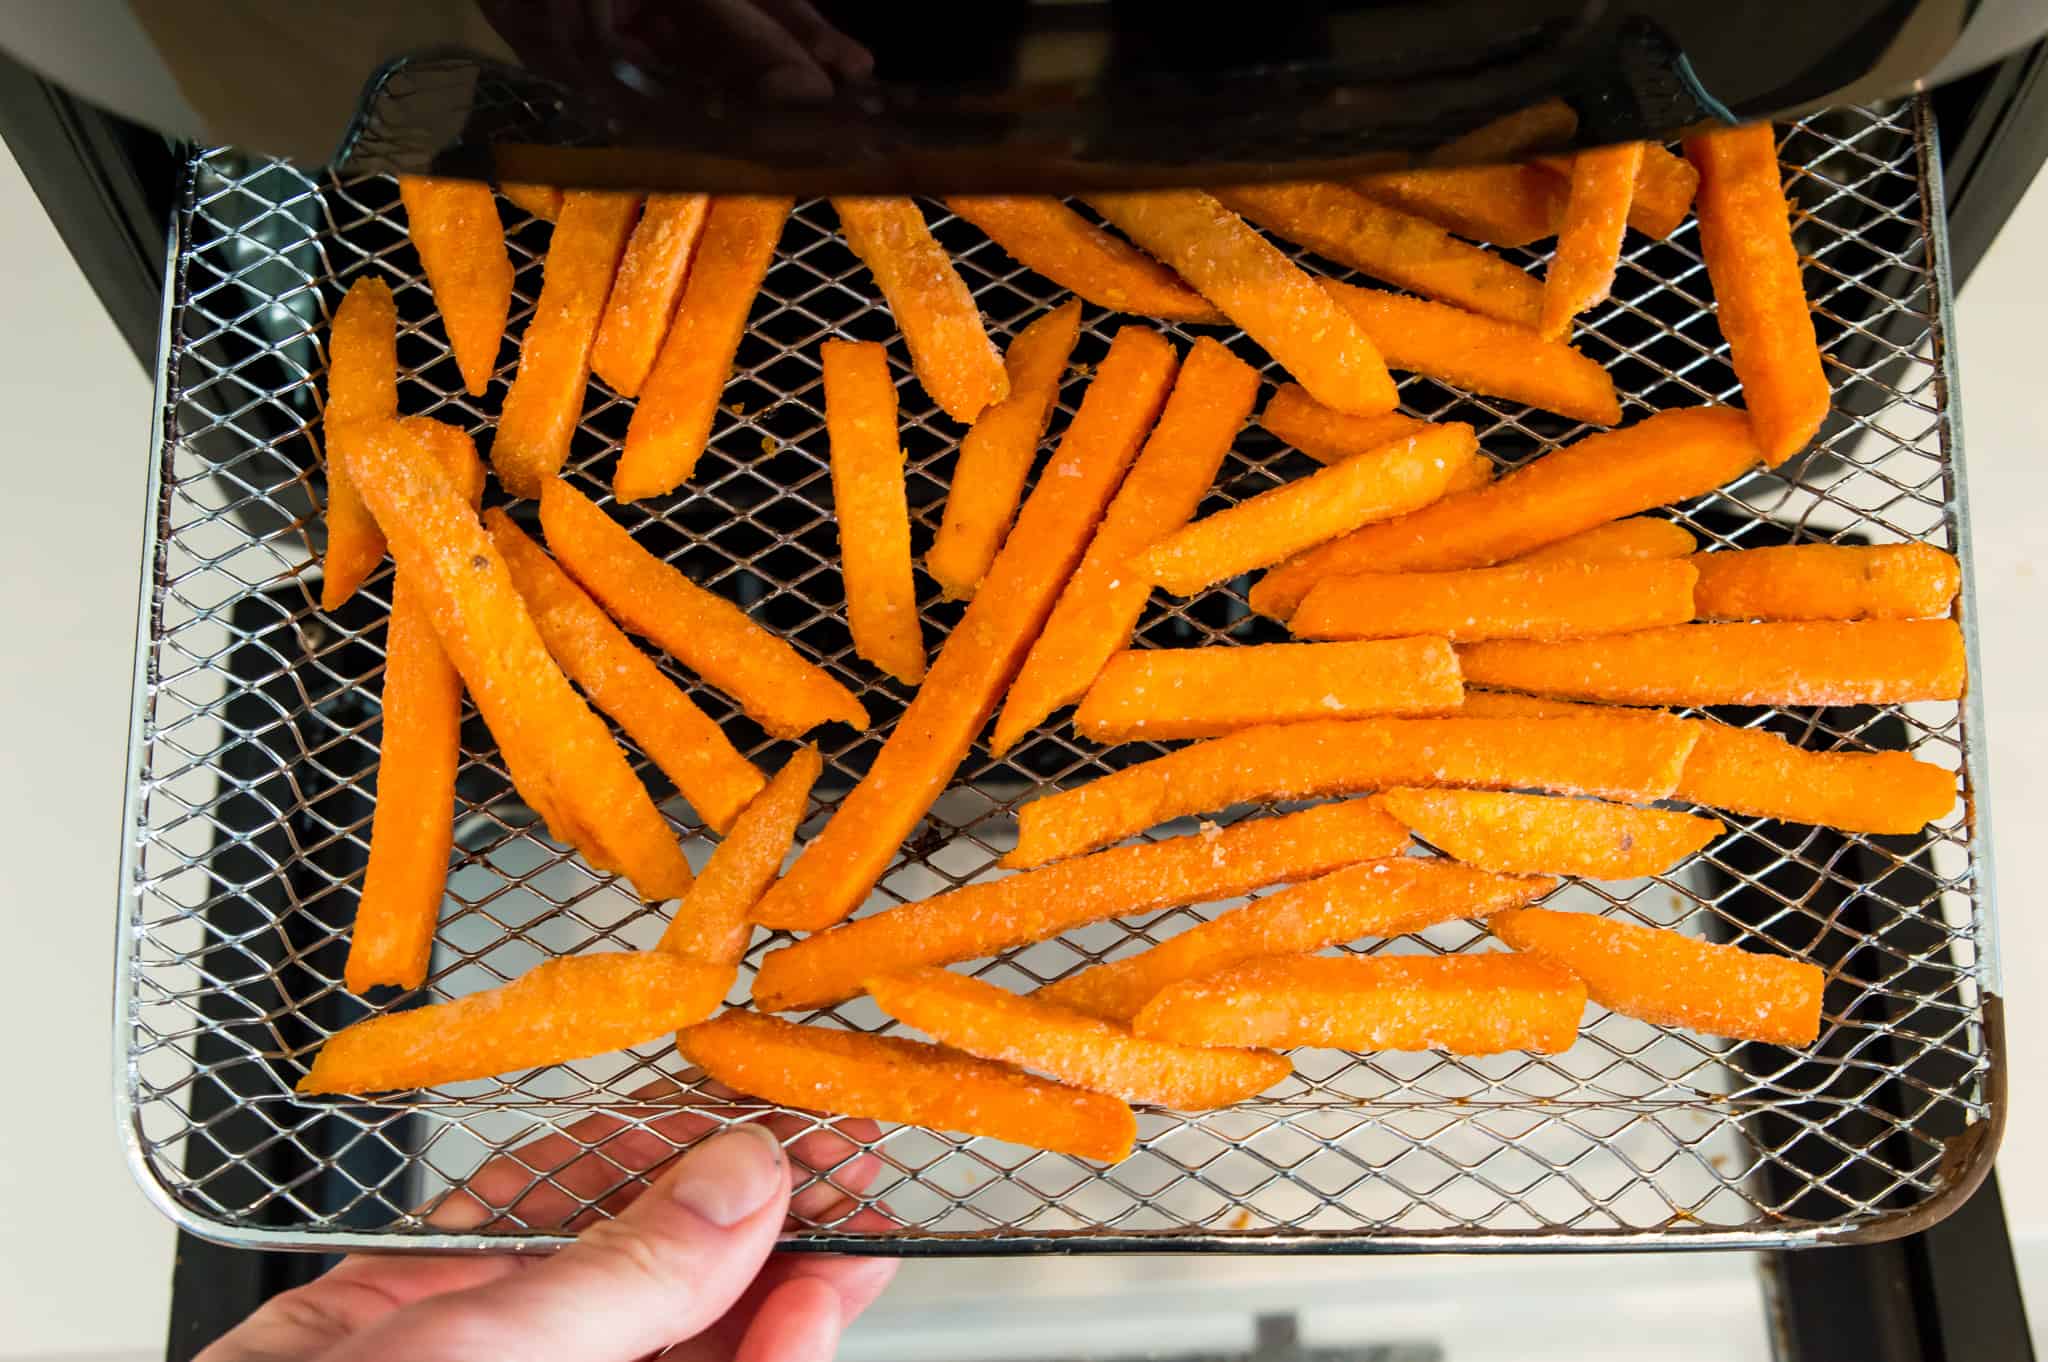 Frozen sweet potato fries on the tray of an air fryer.